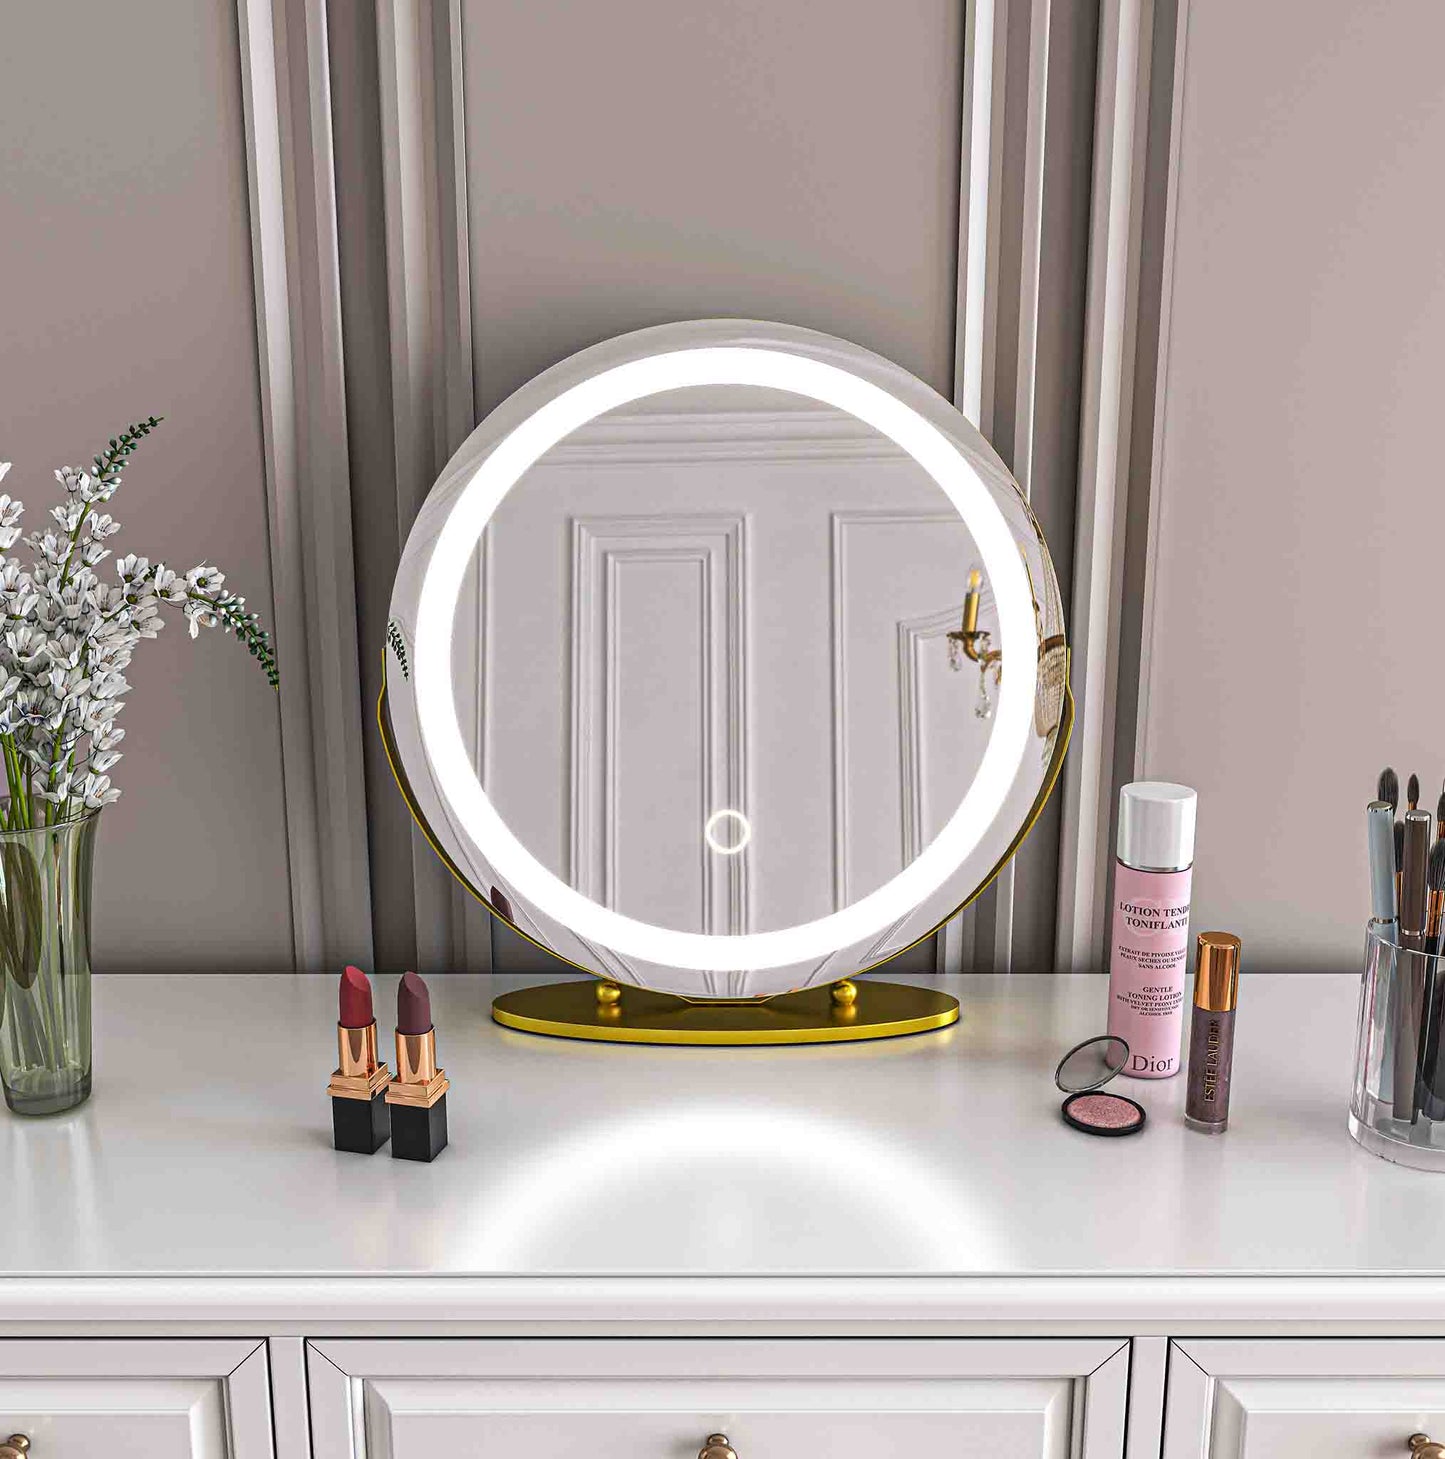 19'' Round Lighted Makeup Vanity Mirror with Lights for Bathroom Table Gold